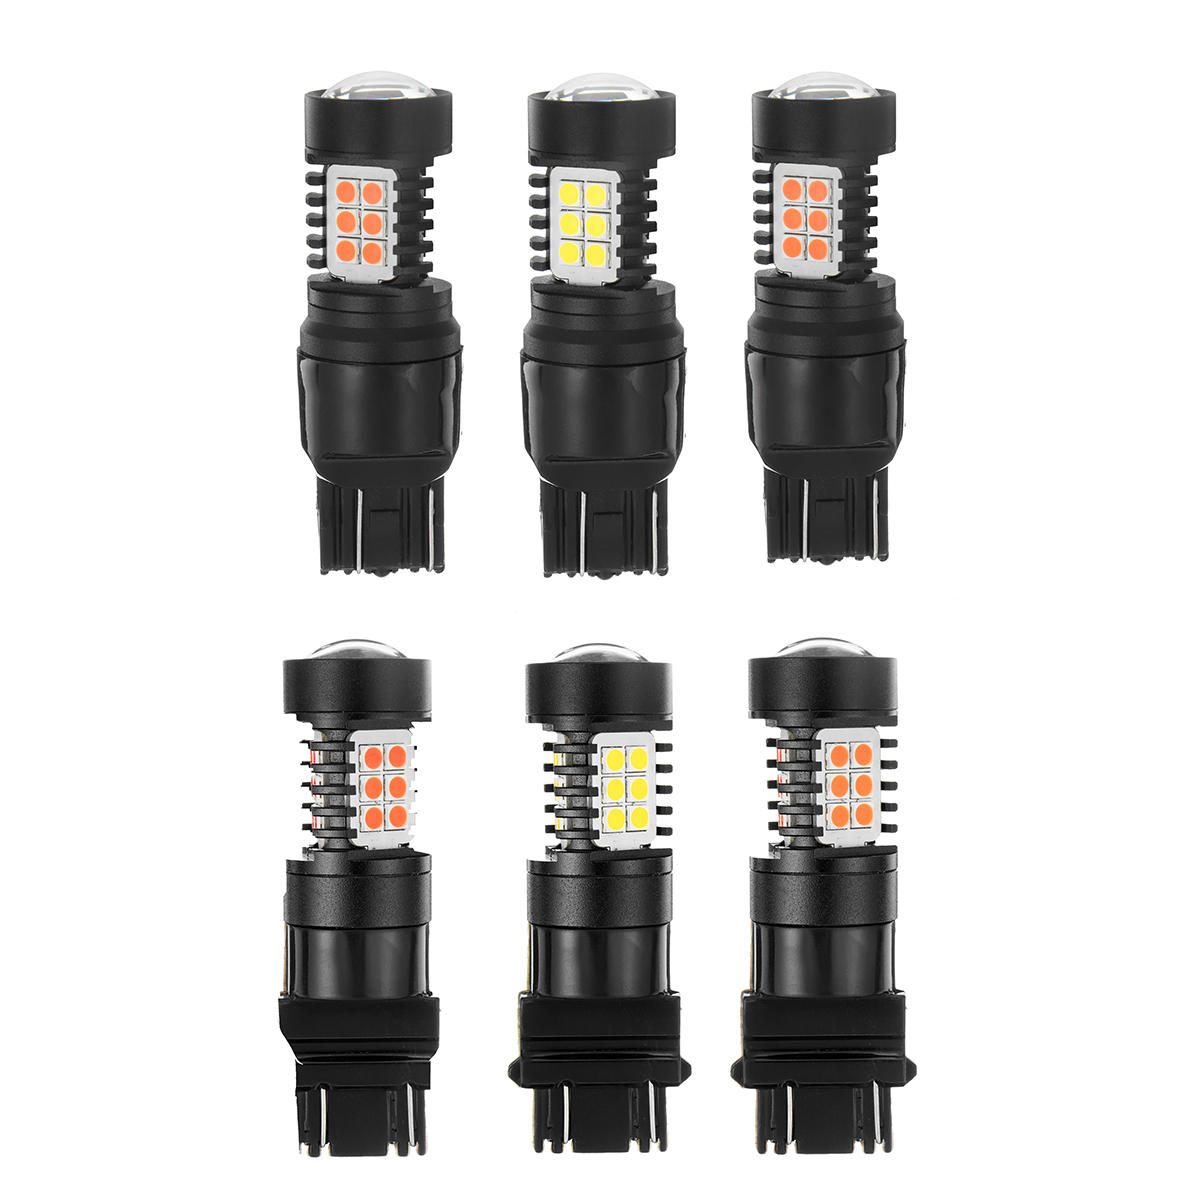 T20 Led-lamp 7443/3157 SMD3030 Wit / geel / rood Motorfietsauto Automobielverlichting